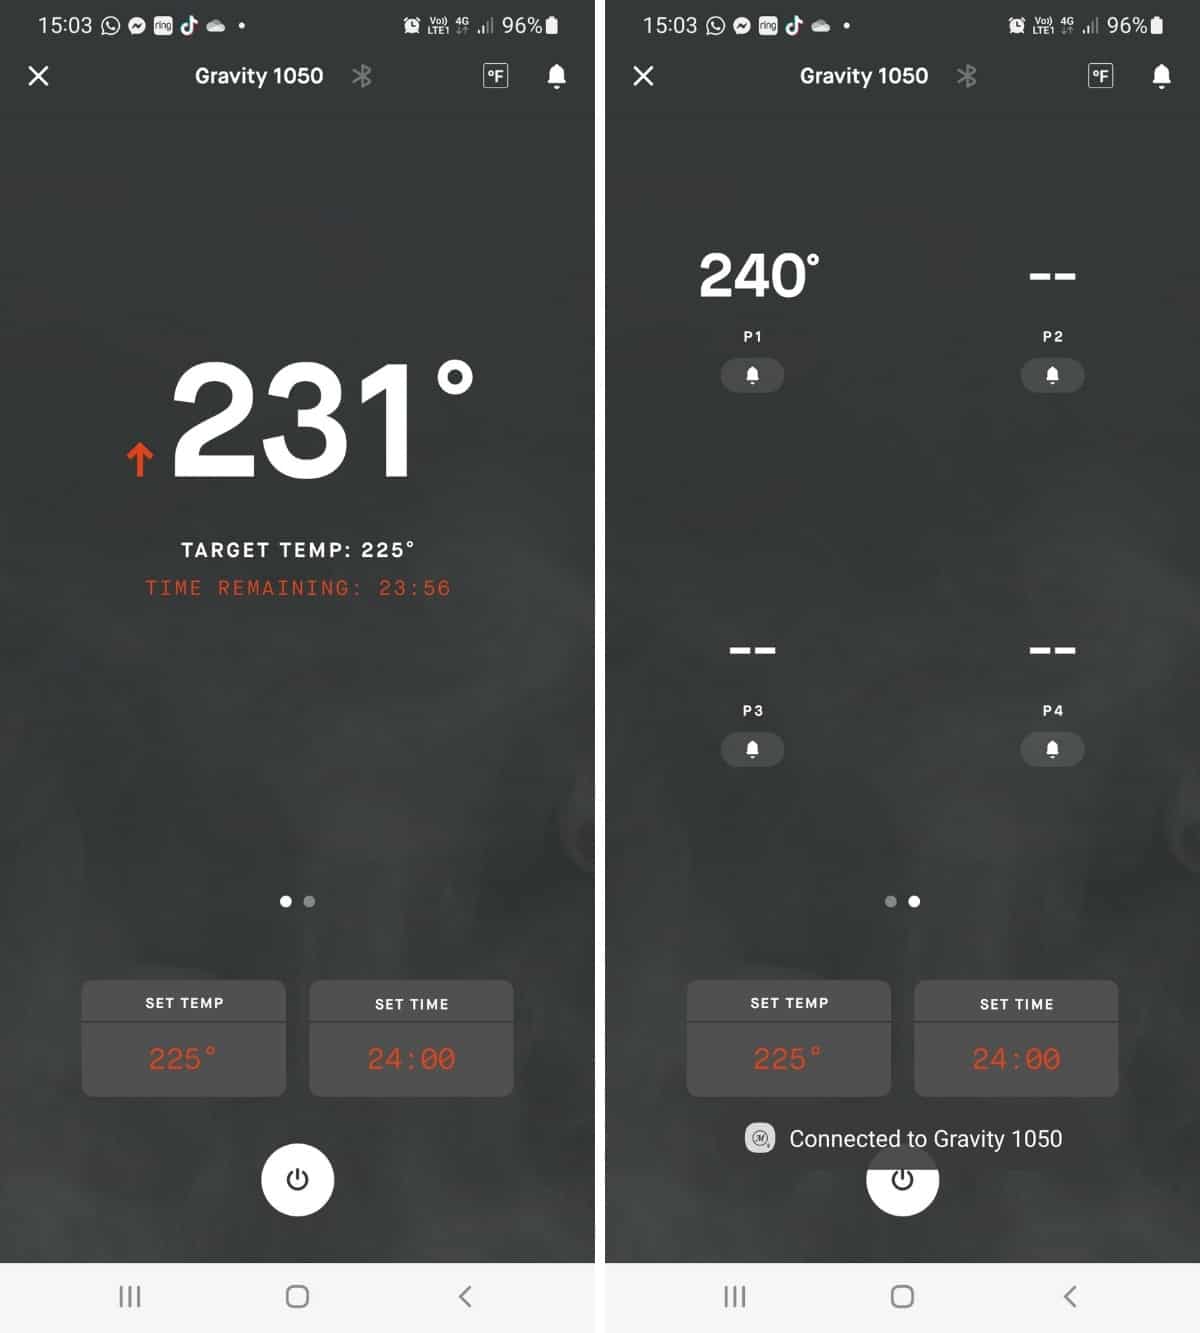 Masterbuilt app screenshots showing the attached thermometer probe and pit probe temperatures.